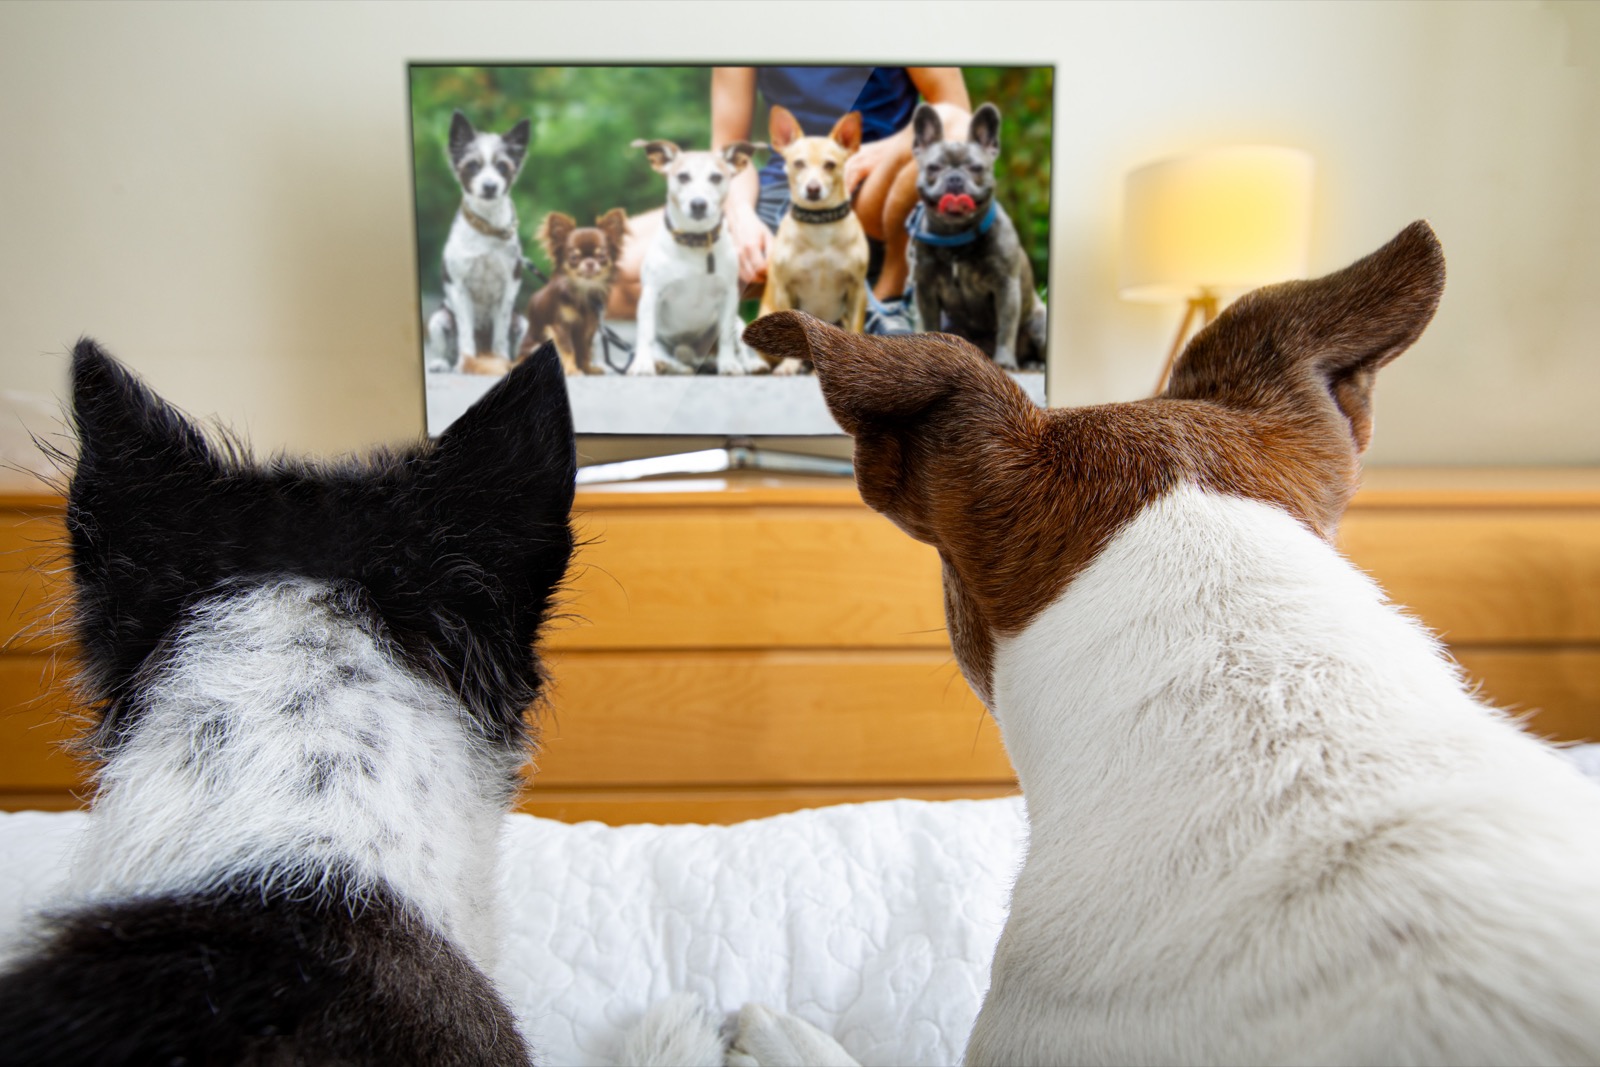 Are You A Black Cat Or Golden Retriever? Quiz Dogs watching TV